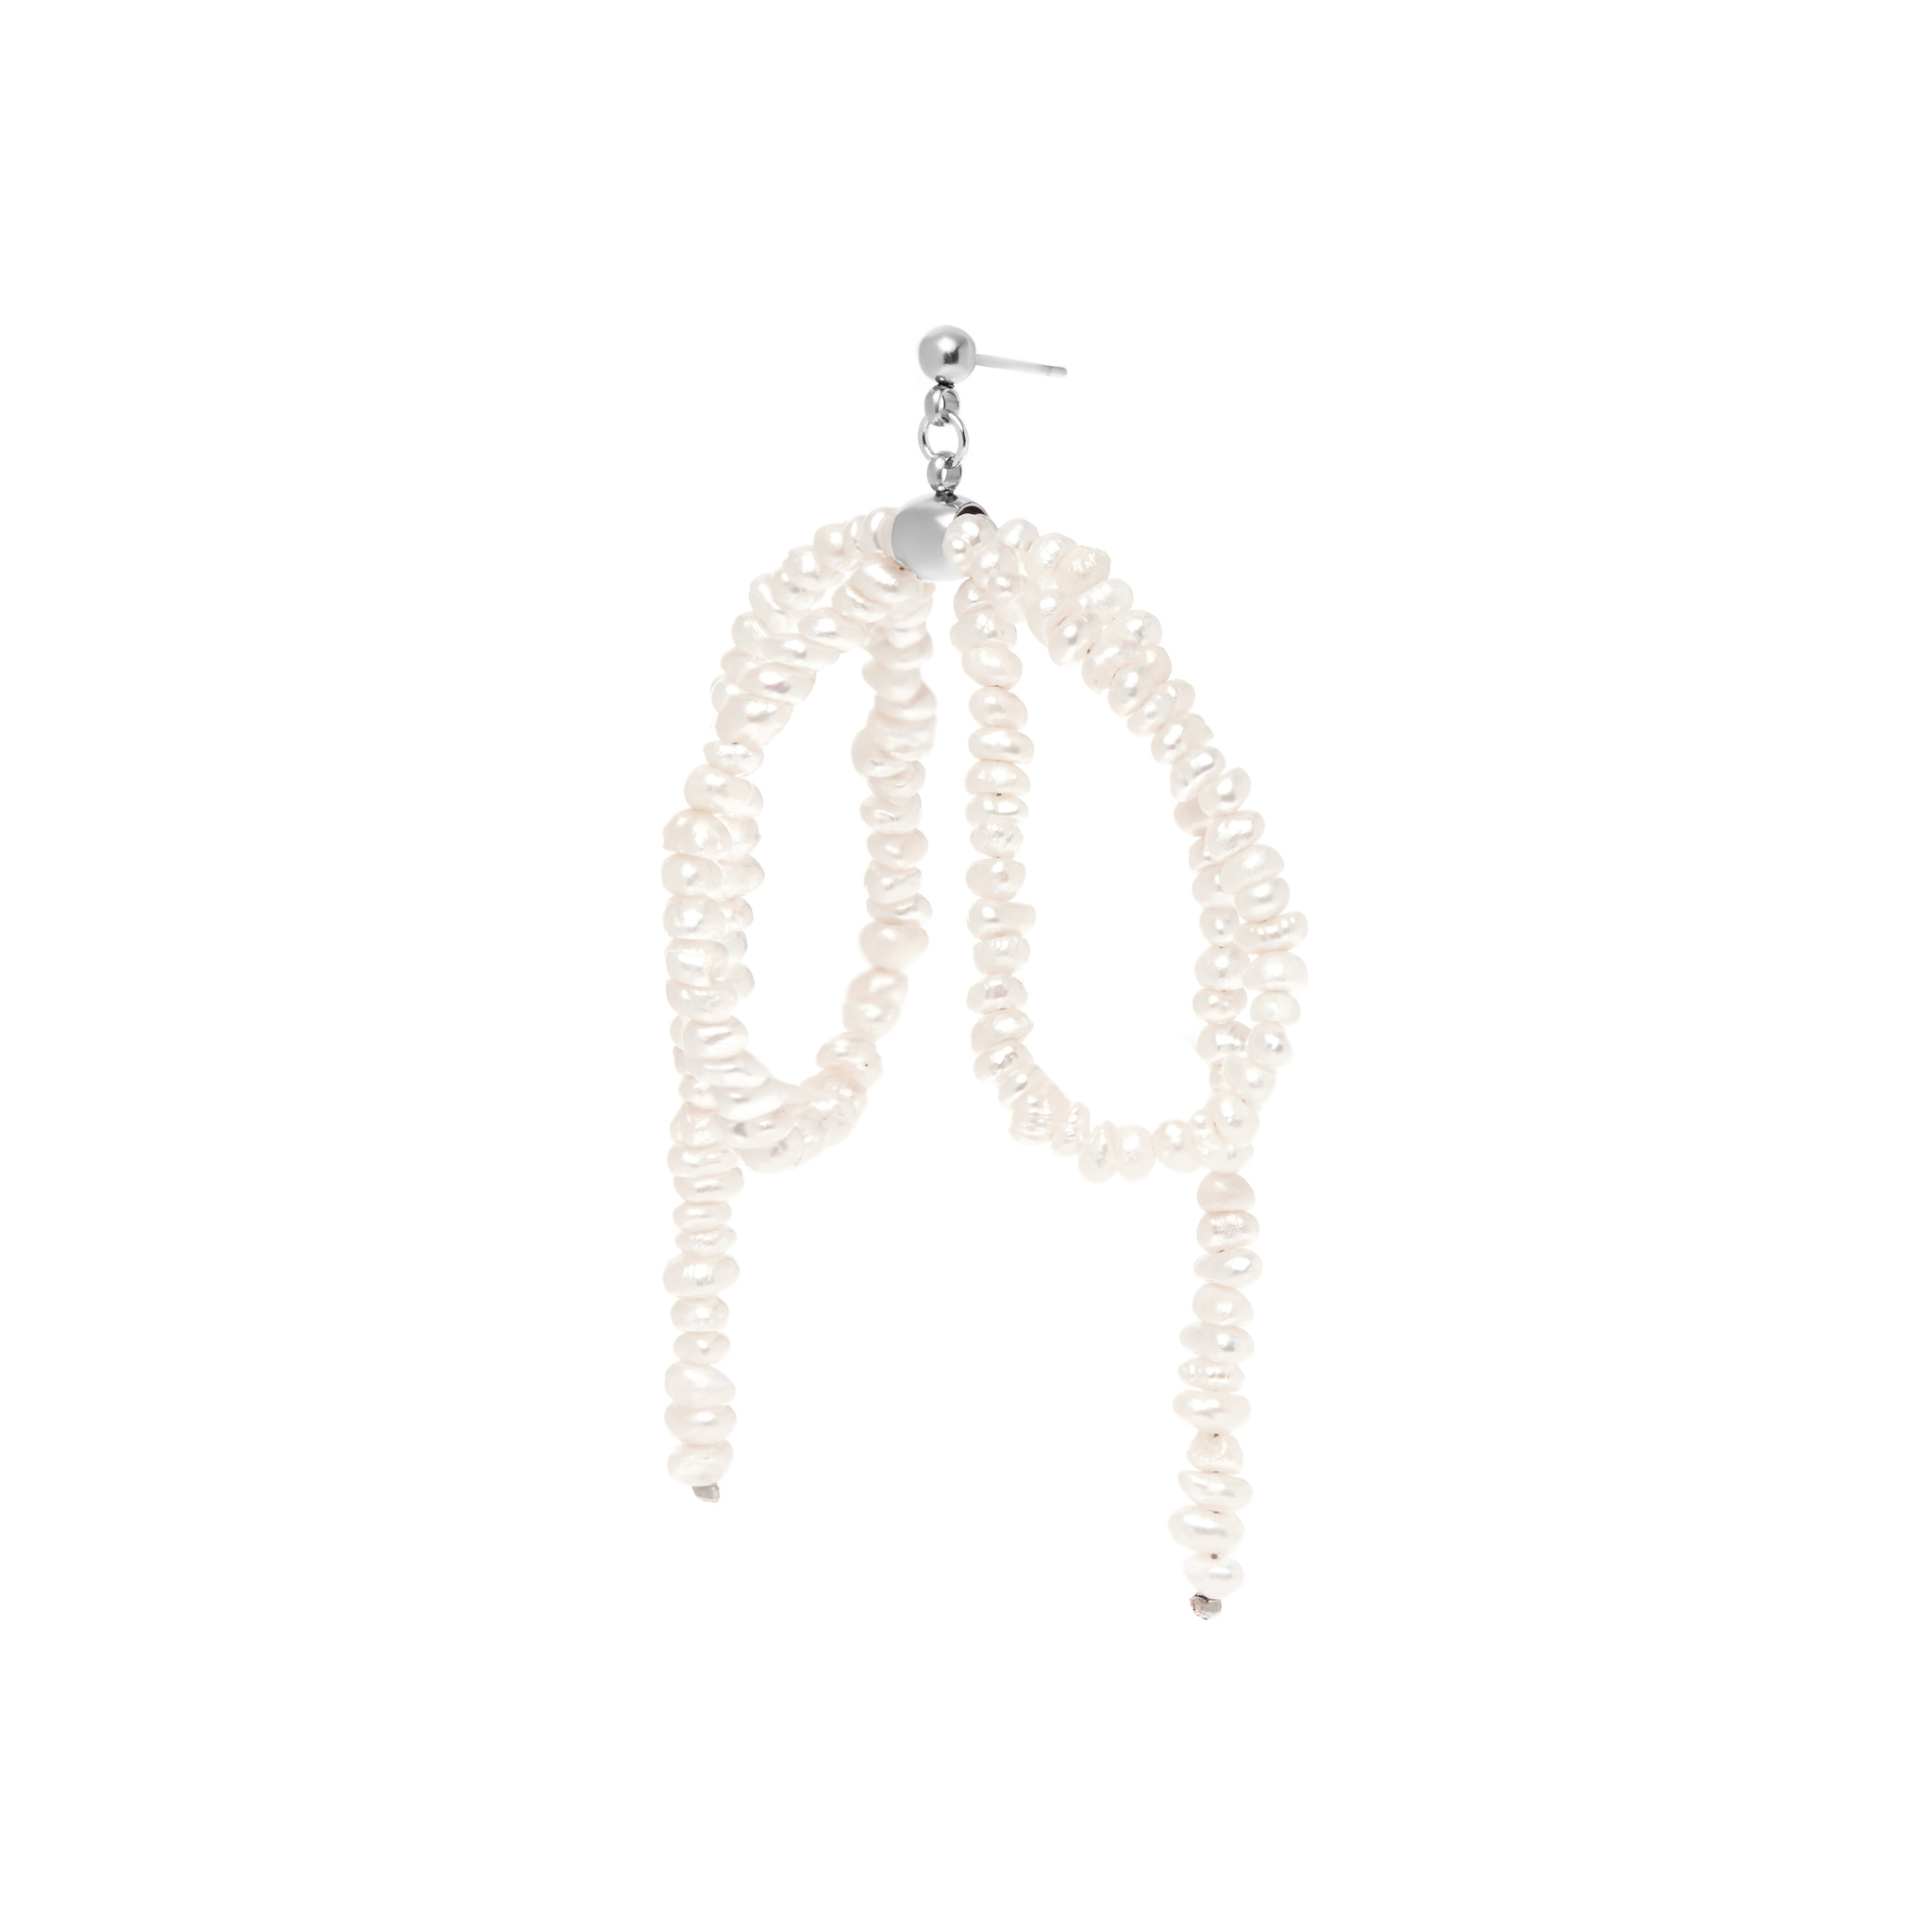 HOLLY JUNE Серьга Pearly Bow Earring holly june серьга pearly bow earring